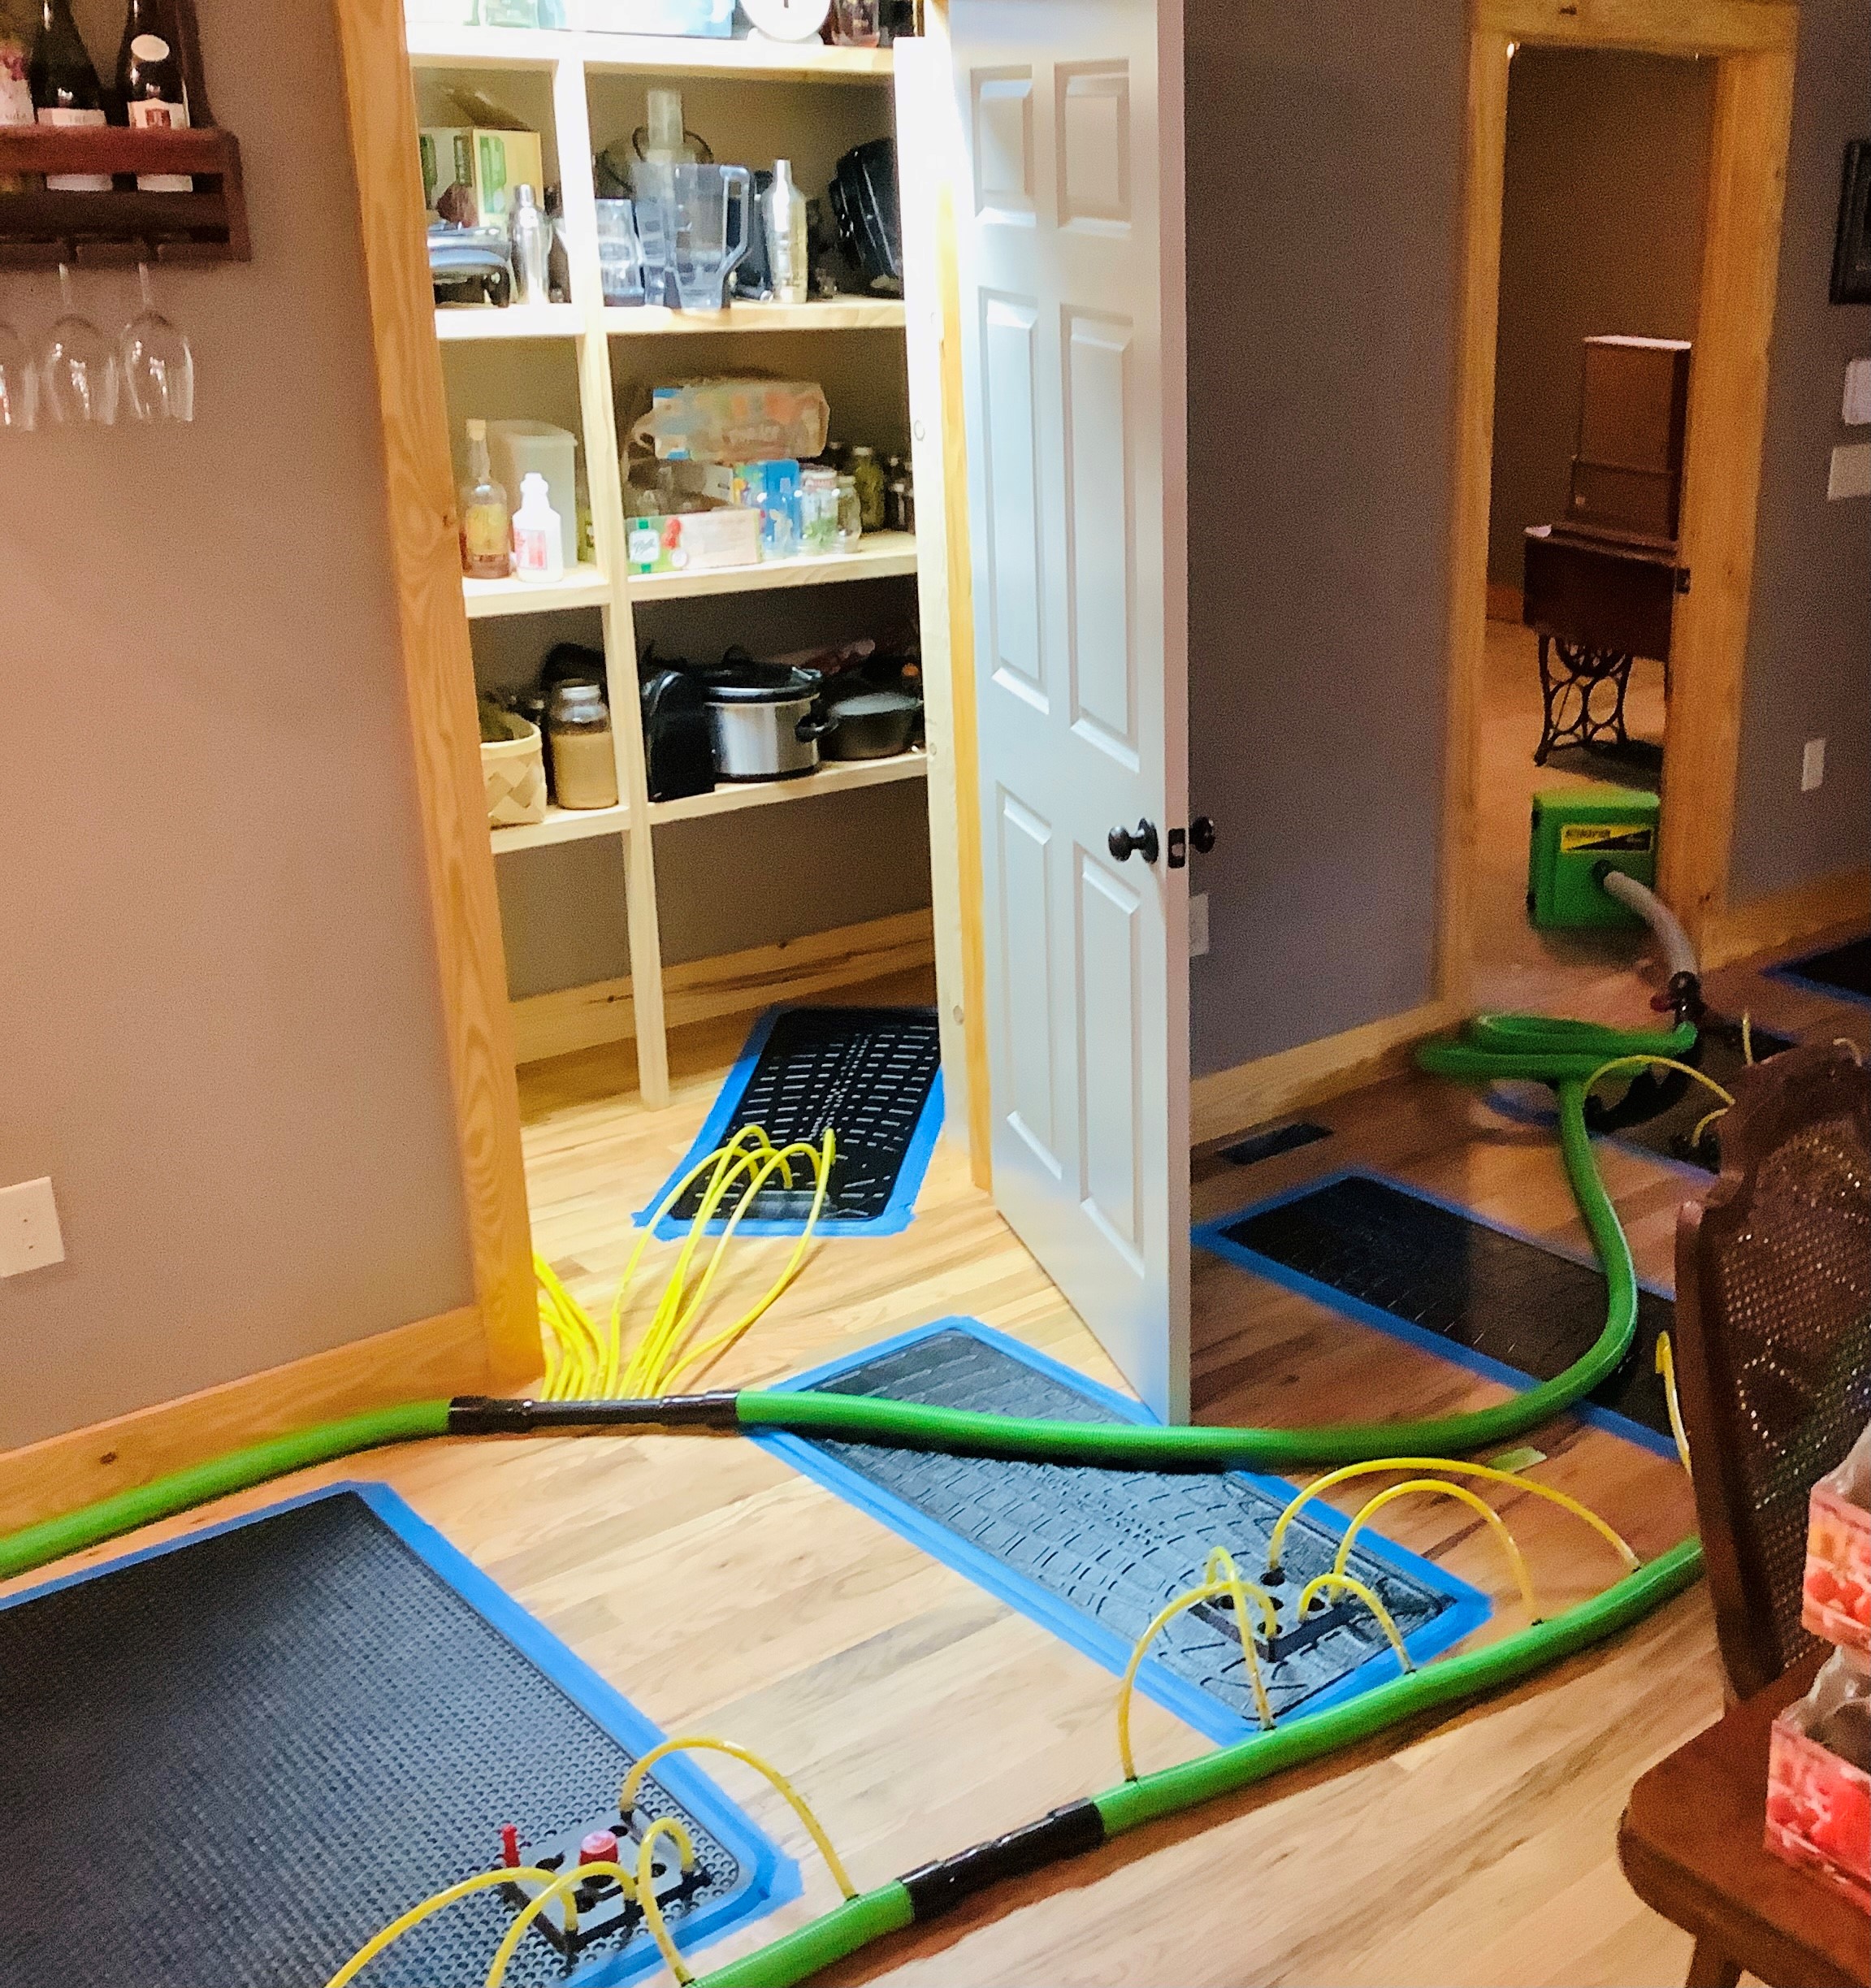 When hardwood floors become wet, we have specialized drying mats to save what would normally be a tear out!